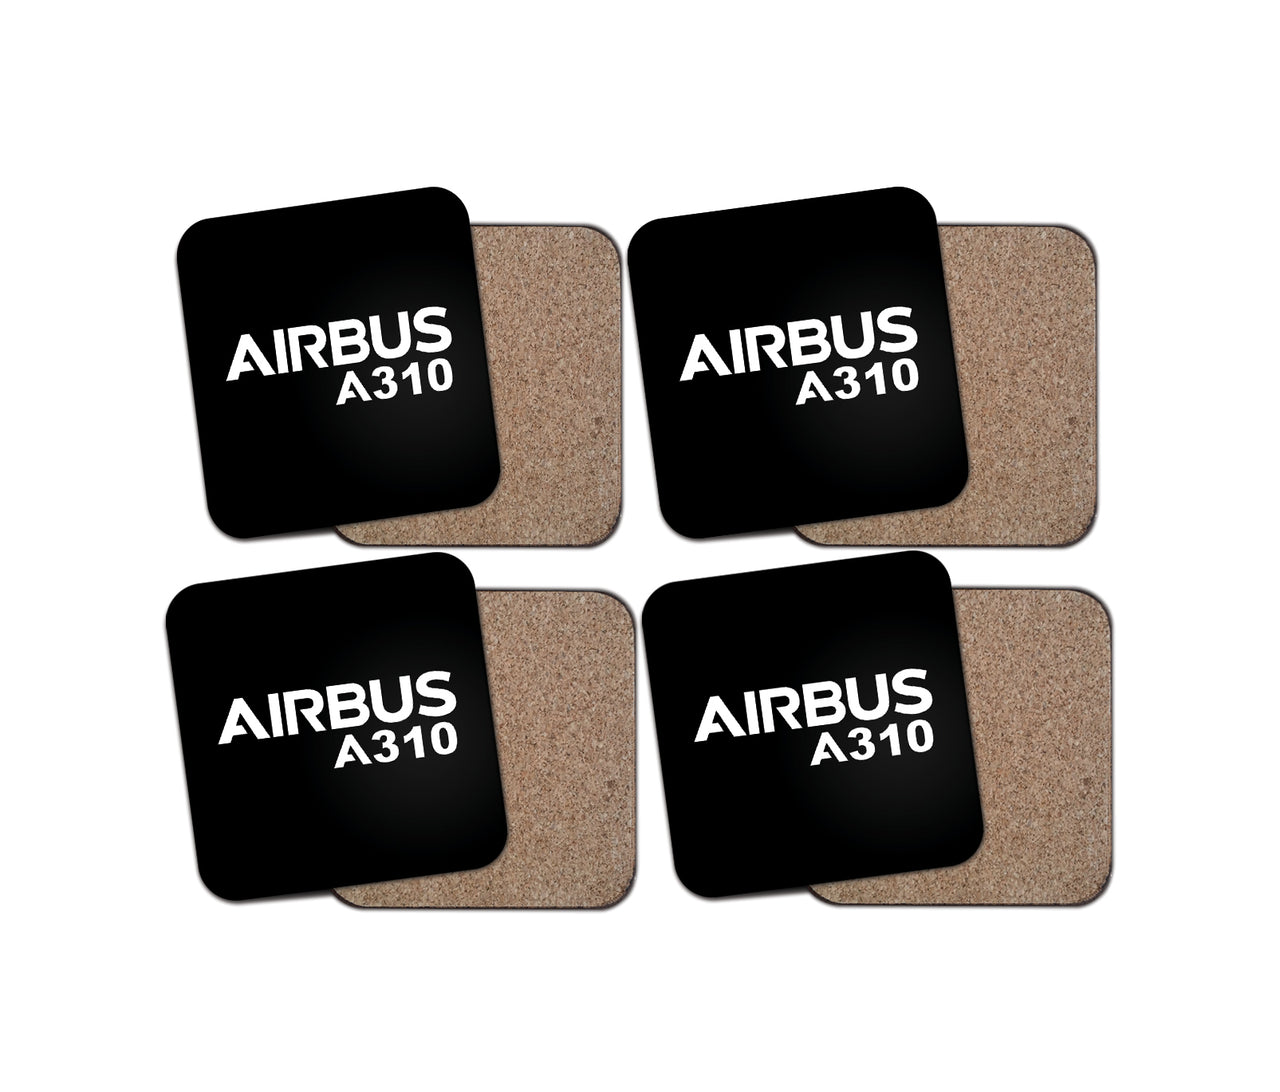 Airbus A310 & Text Designed Coasters